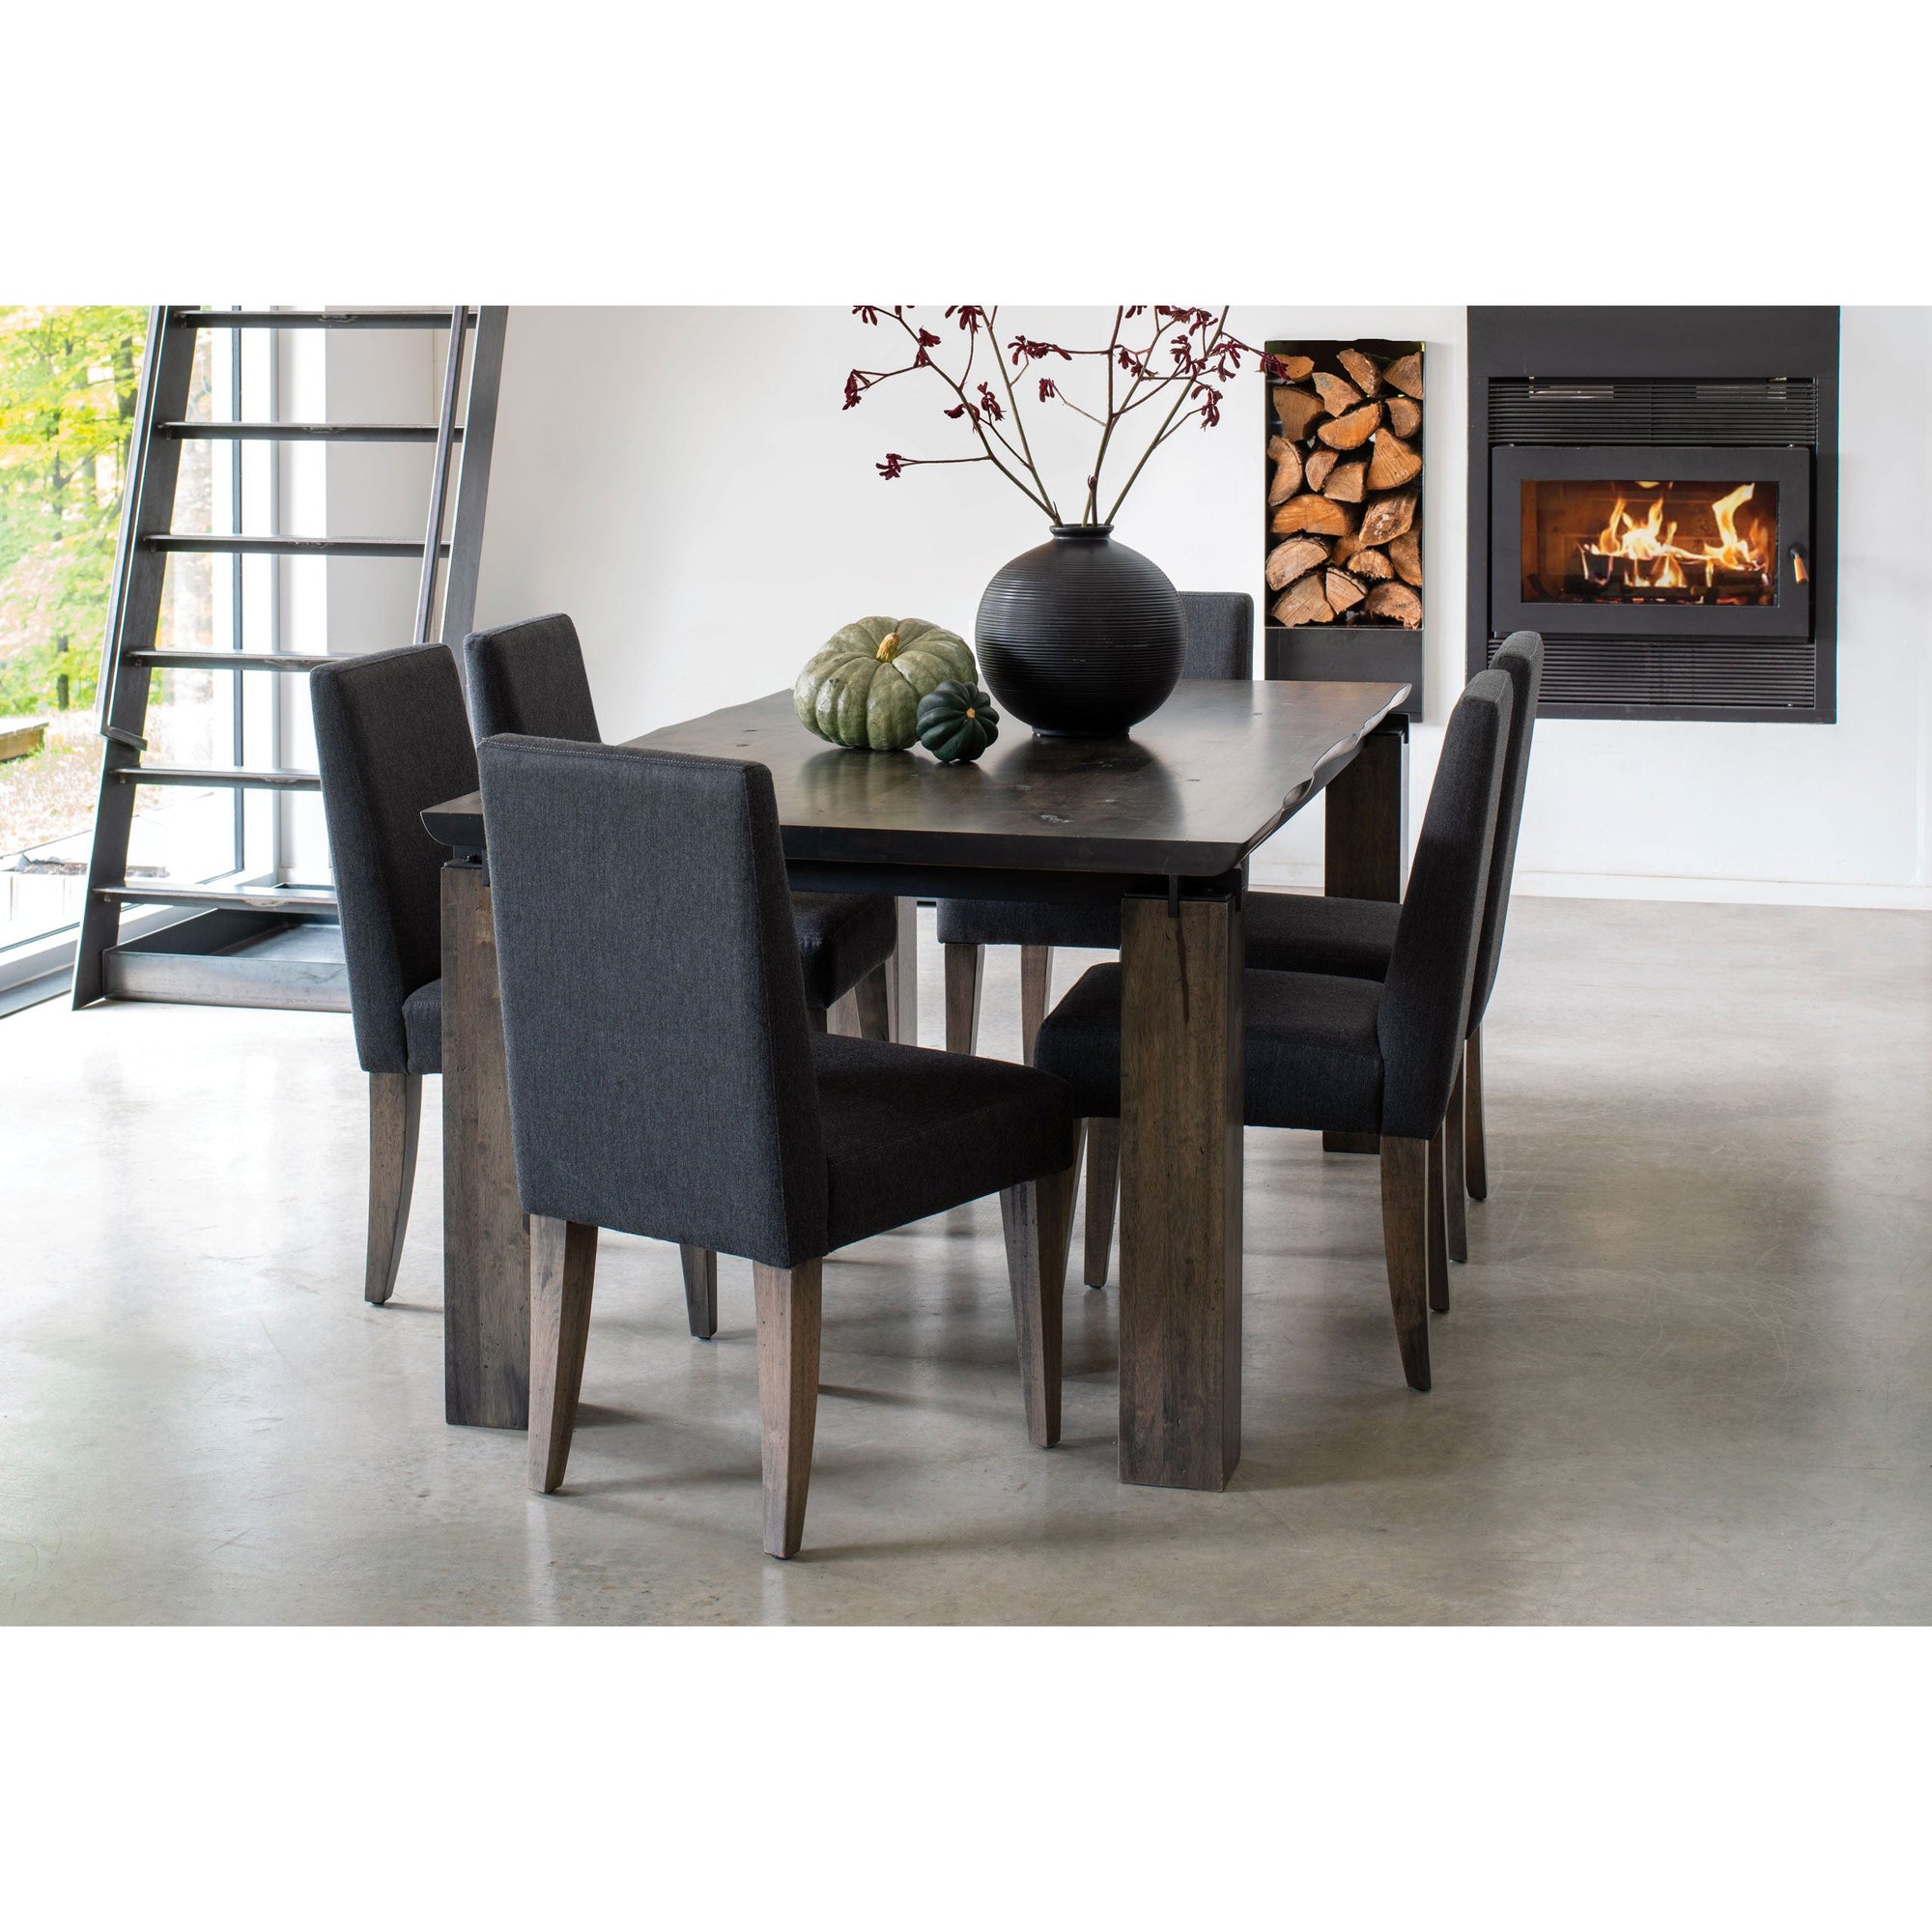 Eastside Dining by Canadel  - Tables & Chairs